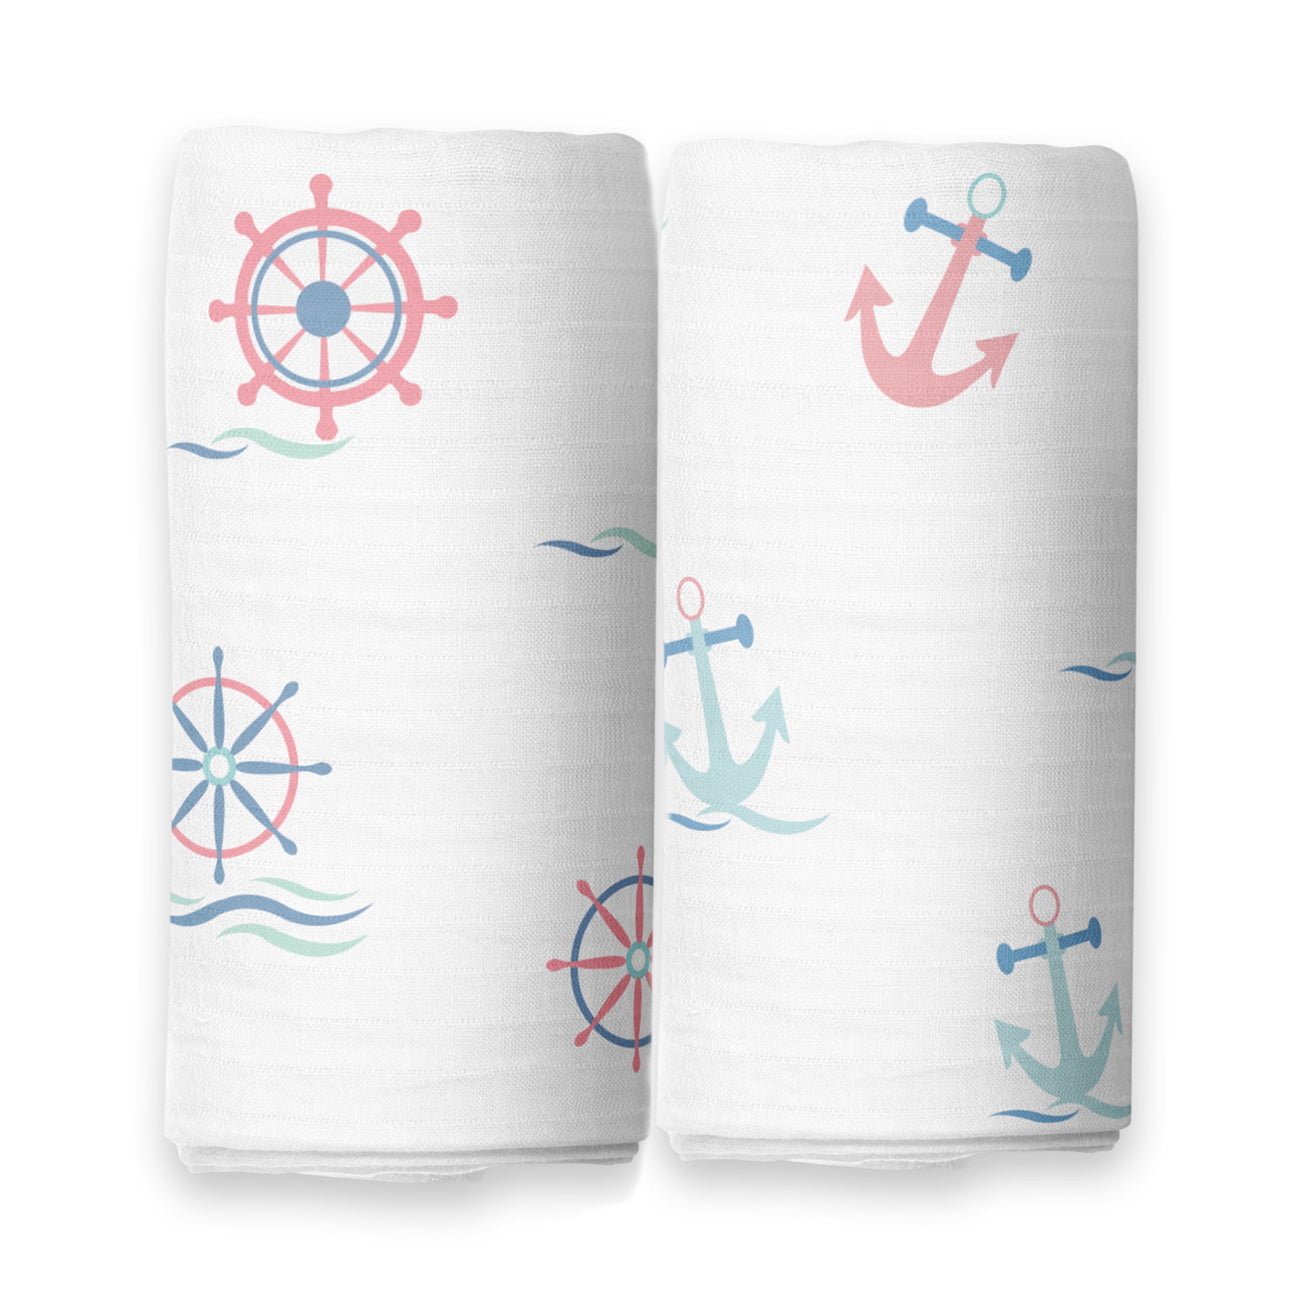 The White Cradle 100% Organic Cotton Baby Swaddle Wrap - Anchor and Shipwheel